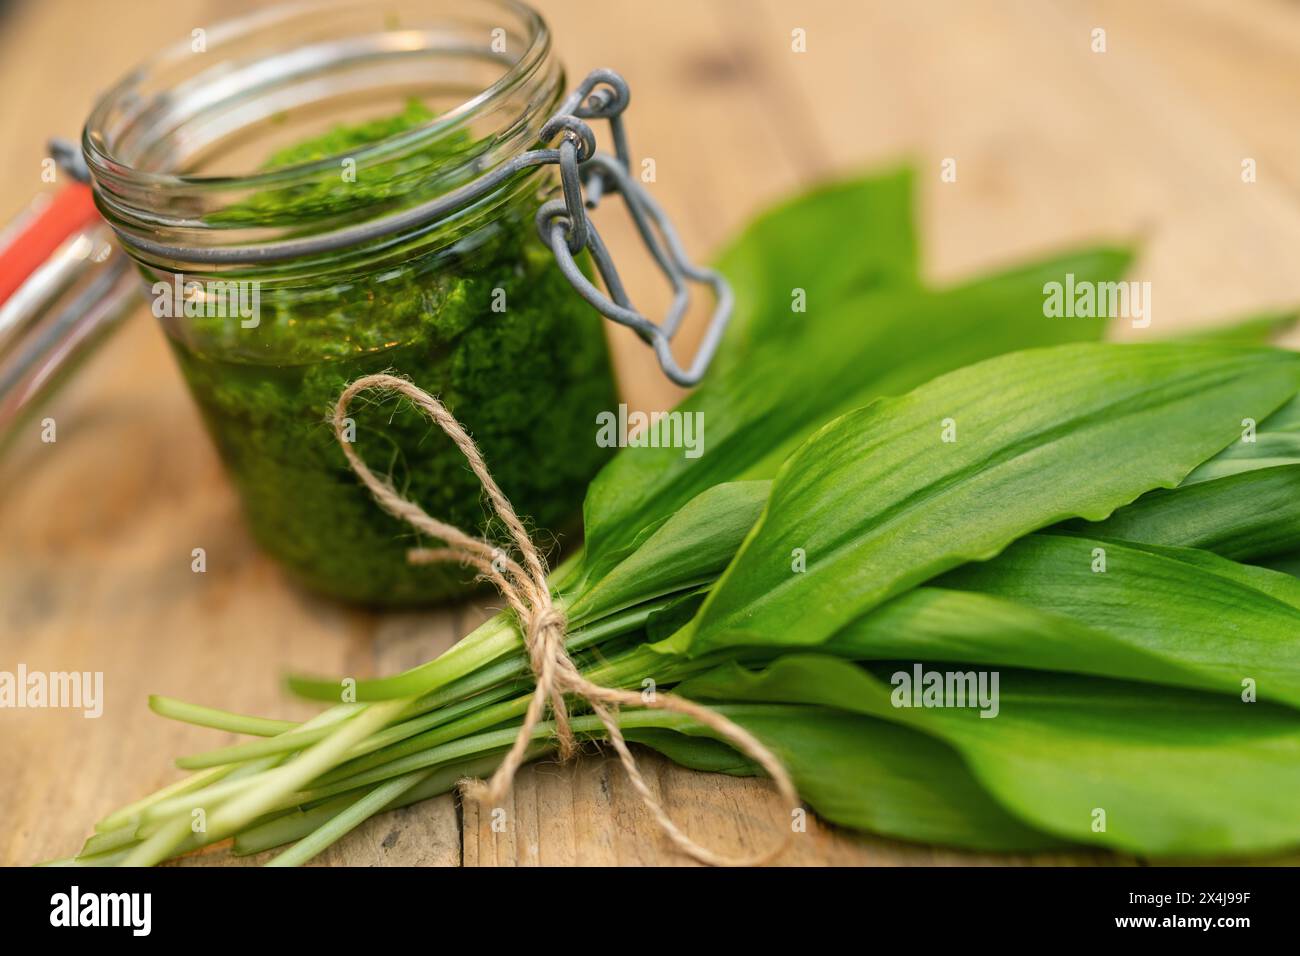 Close-up of wild garlic pesto in an open glass jar with fresh leaves on a wooden surface Stock Photo